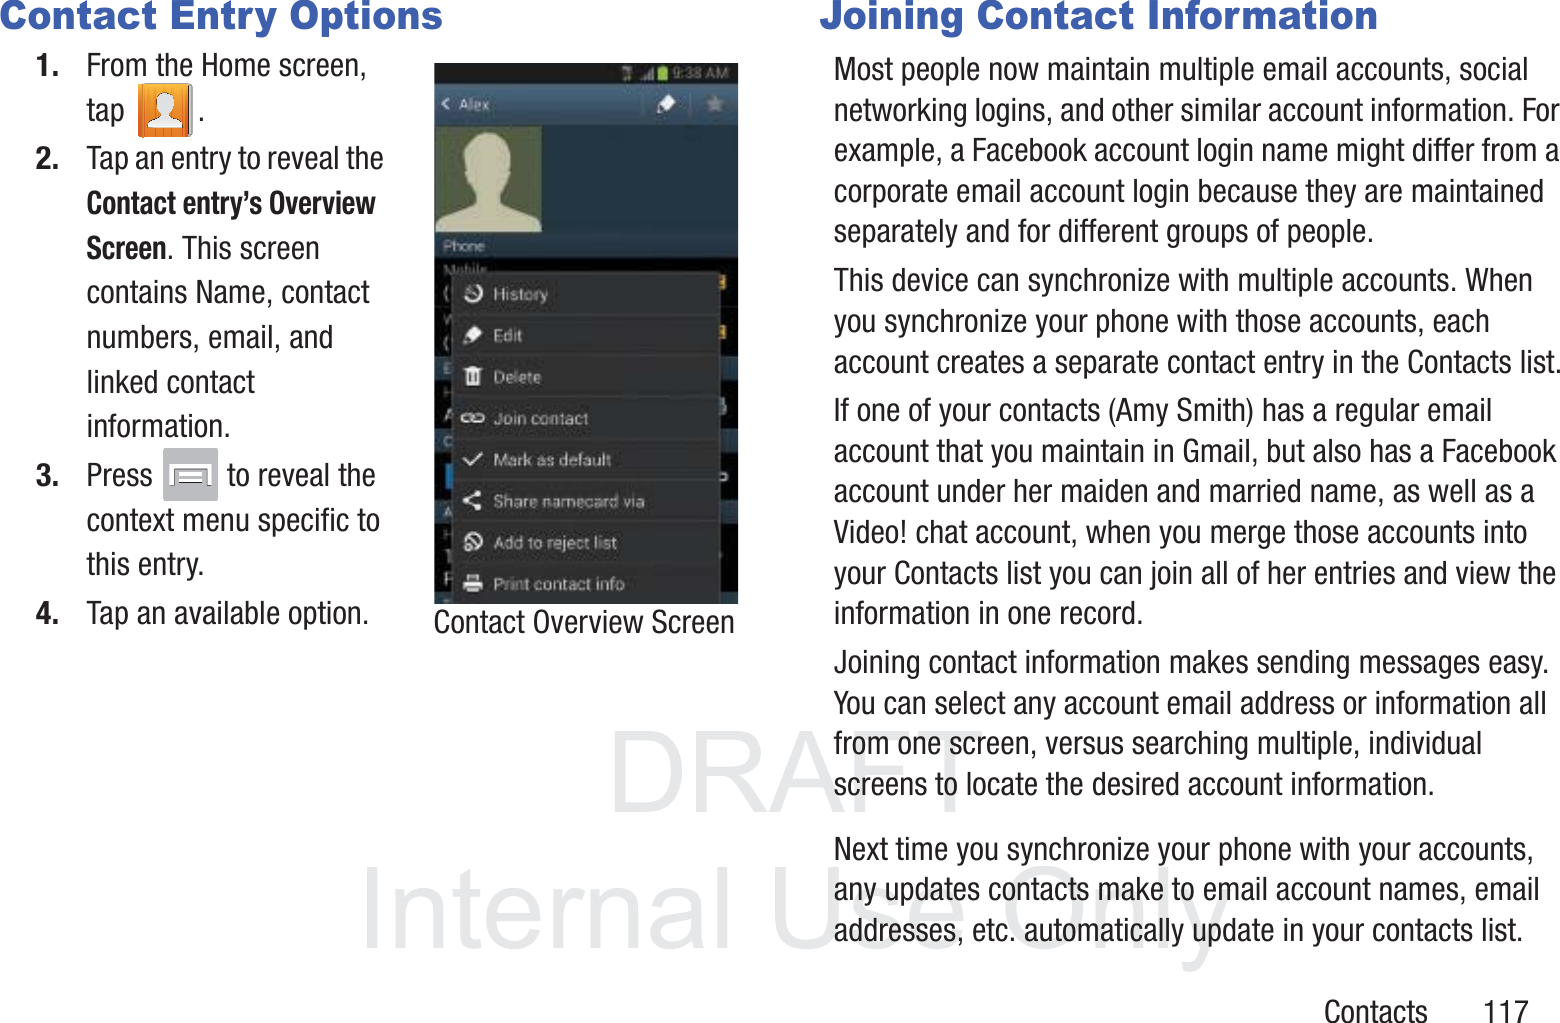 DRAFT InternalUse OnlyContacts       117Contact Entry Options1. From the Home screen, tap . 2. Tap an entry to reveal the Contact entry’s Overview Screen. This screen contains Name, contact numbers, email, and linked contact information. 3. Press   to reveal the context menu specific to this entry.4. Tap an available option.Joining Contact InformationMost people now maintain multiple email accounts, social networking logins, and other similar account information. For example, a Facebook account login name might differ from a corporate email account login because they are maintained separately and for different groups of people.This device can synchronize with multiple accounts. When you synchronize your phone with those accounts, each account creates a separate contact entry in the Contacts list.If one of your contacts (Amy Smith) has a regular email account that you maintain in Gmail, but also has a Facebook account under her maiden and married name, as well as a Video! chat account, when you merge those accounts into your Contacts list you can join all of her entries and view the information in one record.Joining contact information makes sending messages easy. You can select any account email address or information all from one screen, versus searching multiple, individual screens to locate the desired account information.Next time you synchronize your phone with your accounts, any updates contacts make to email account names, email addresses, etc. automatically update in your contacts list.Contact Overview Screen